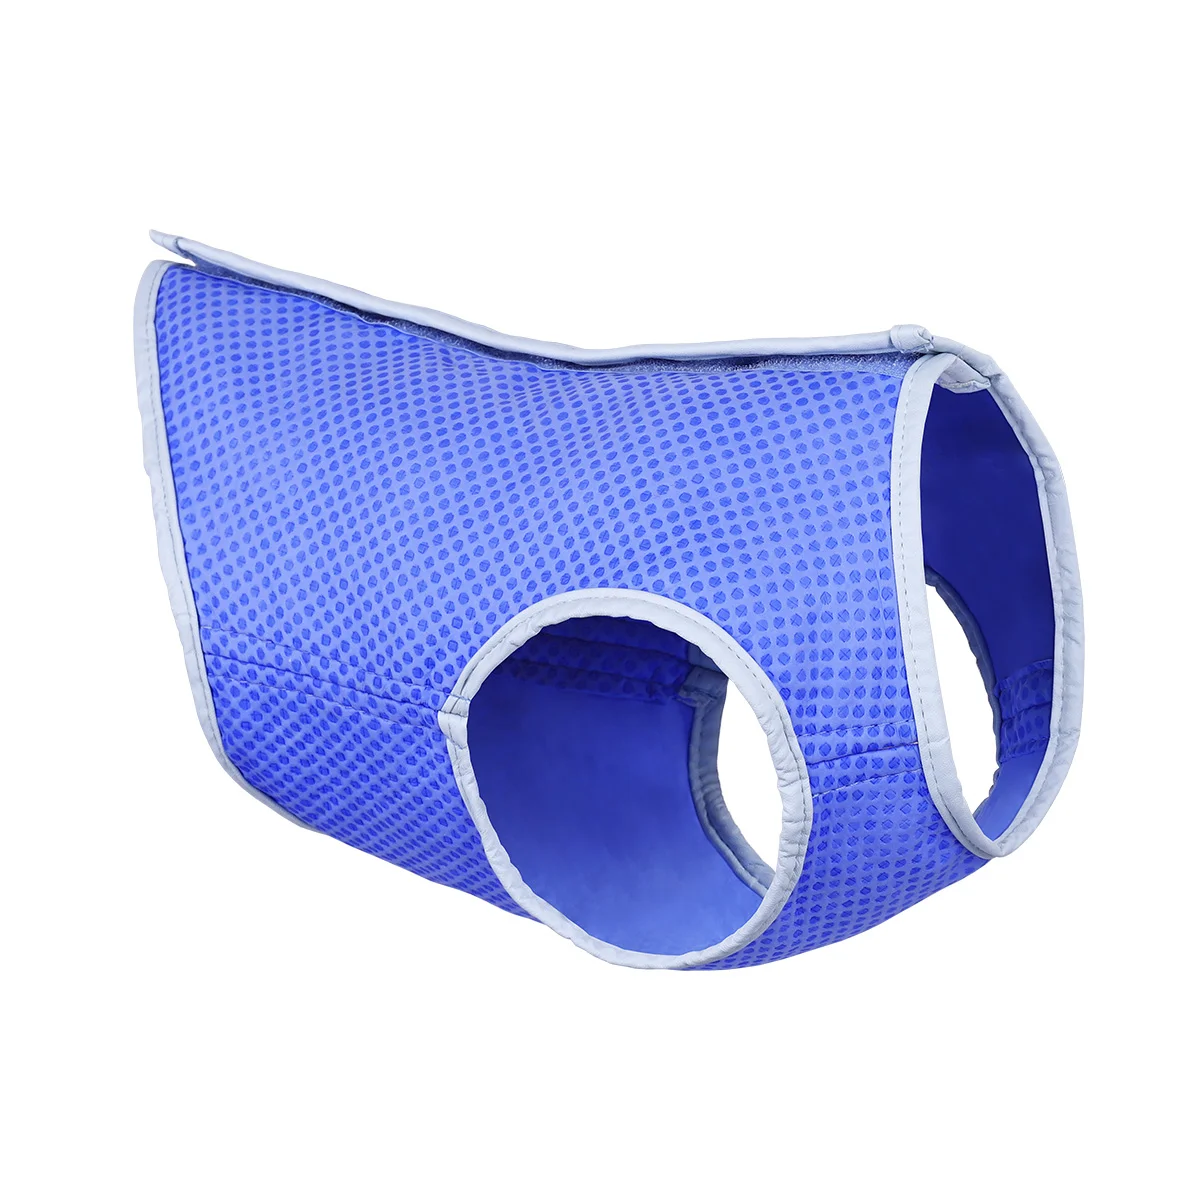 UKCOCO Pet Cooling Dog Ice-cooling Harness Pet Mesh Vest with Tape - Size M (Blue)